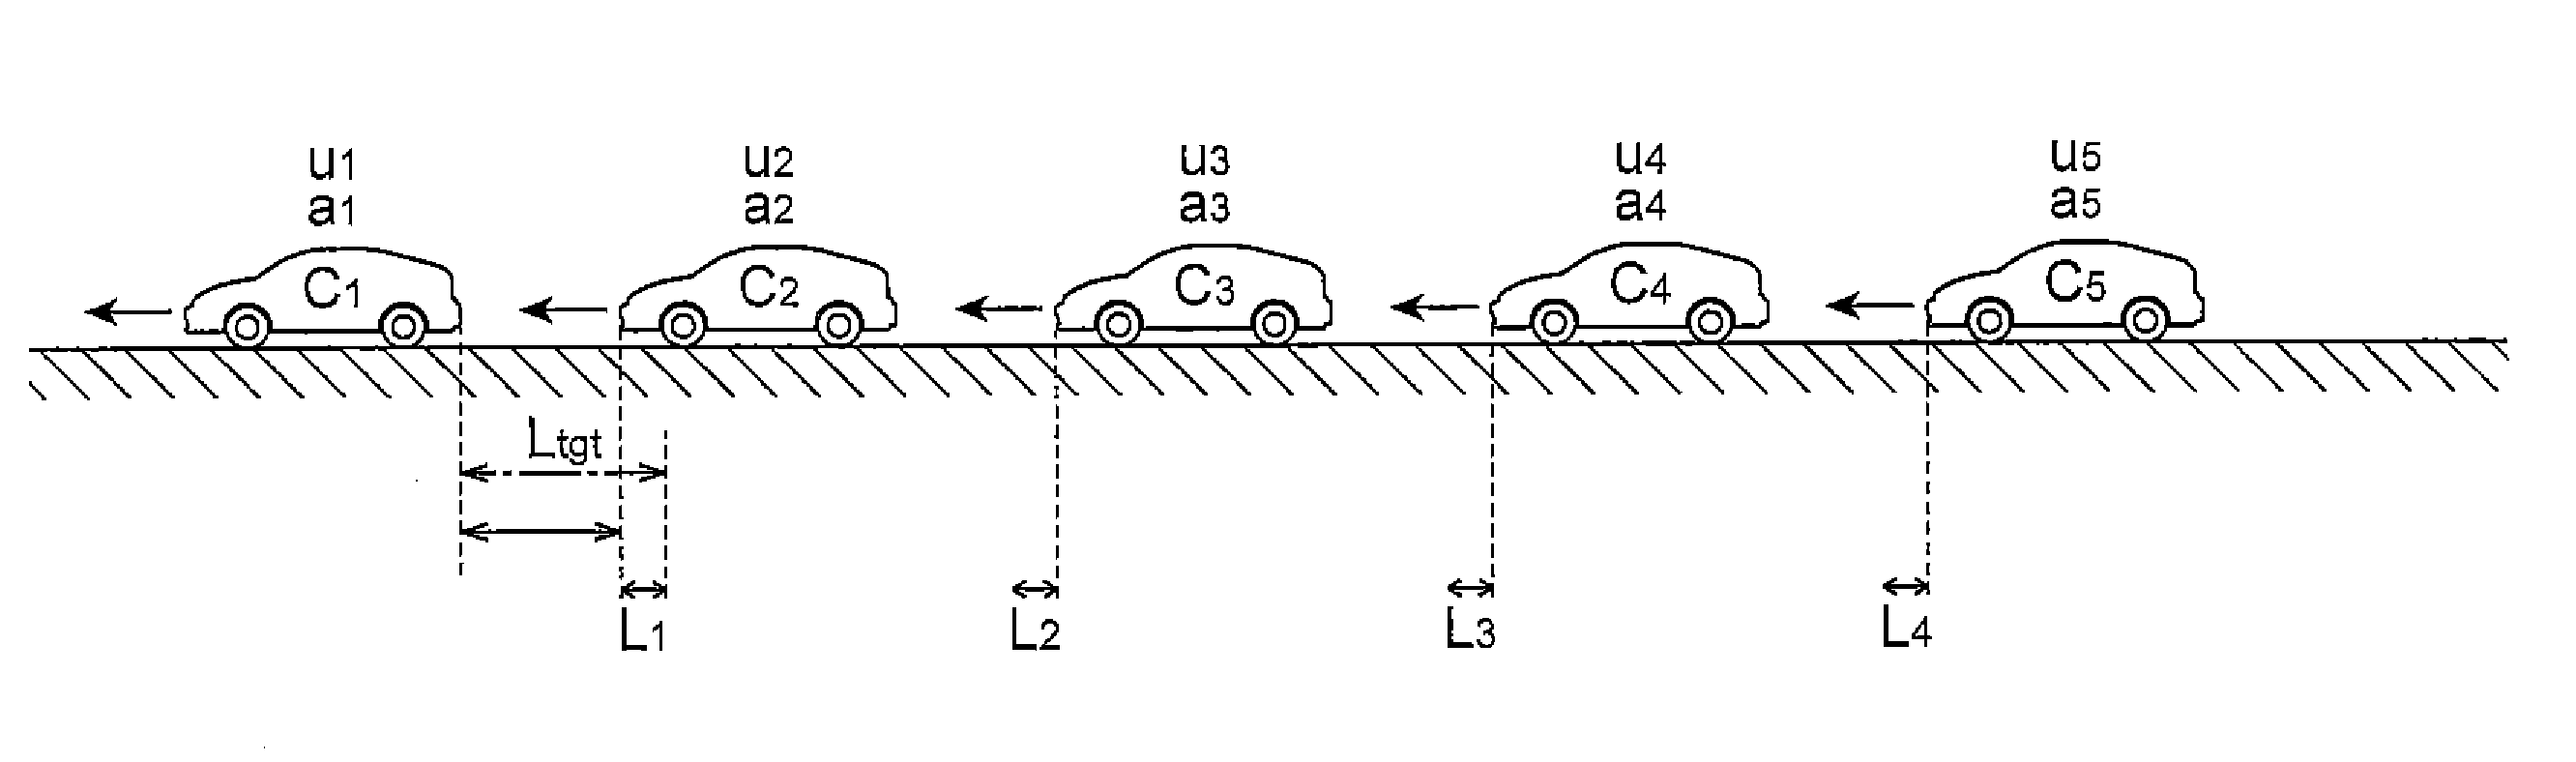 Row running control system and vehicle